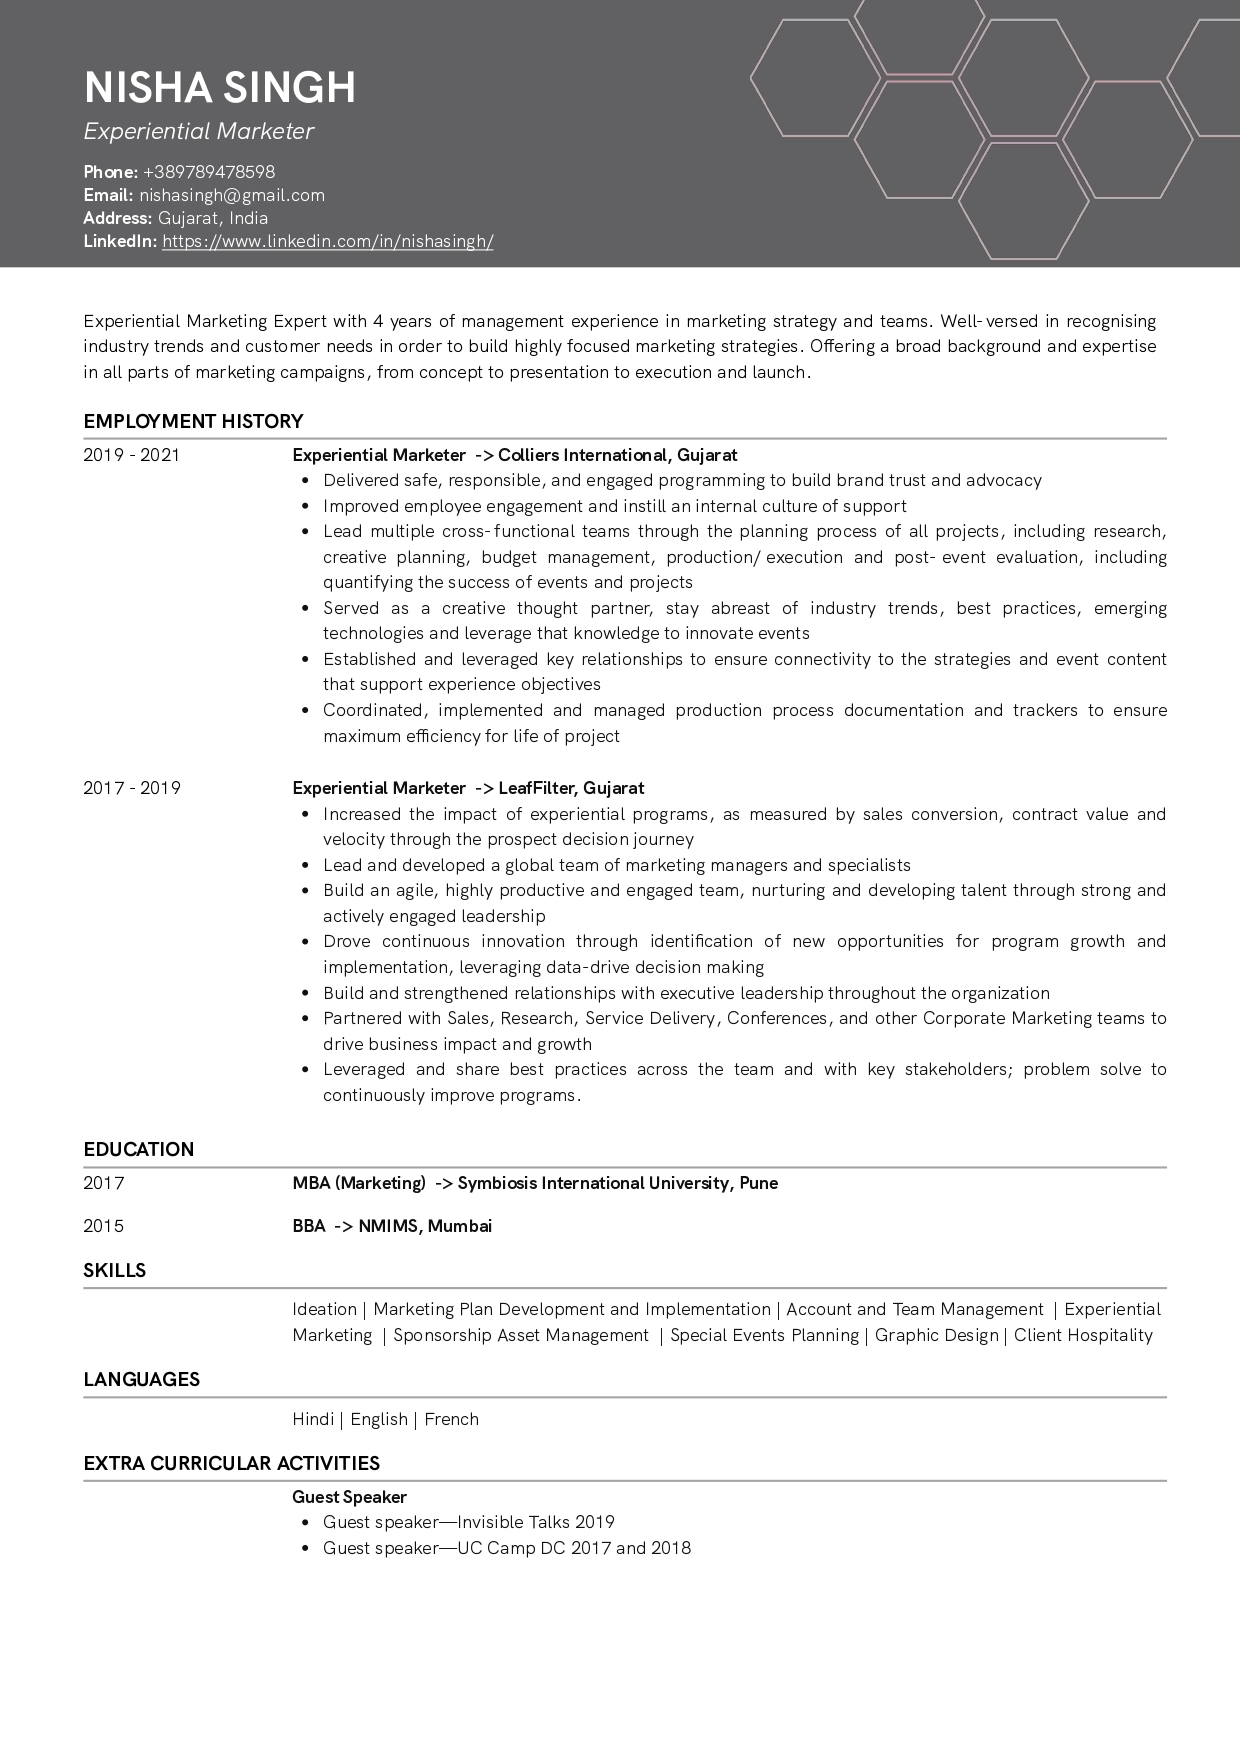 Resume of Experiential Marketer